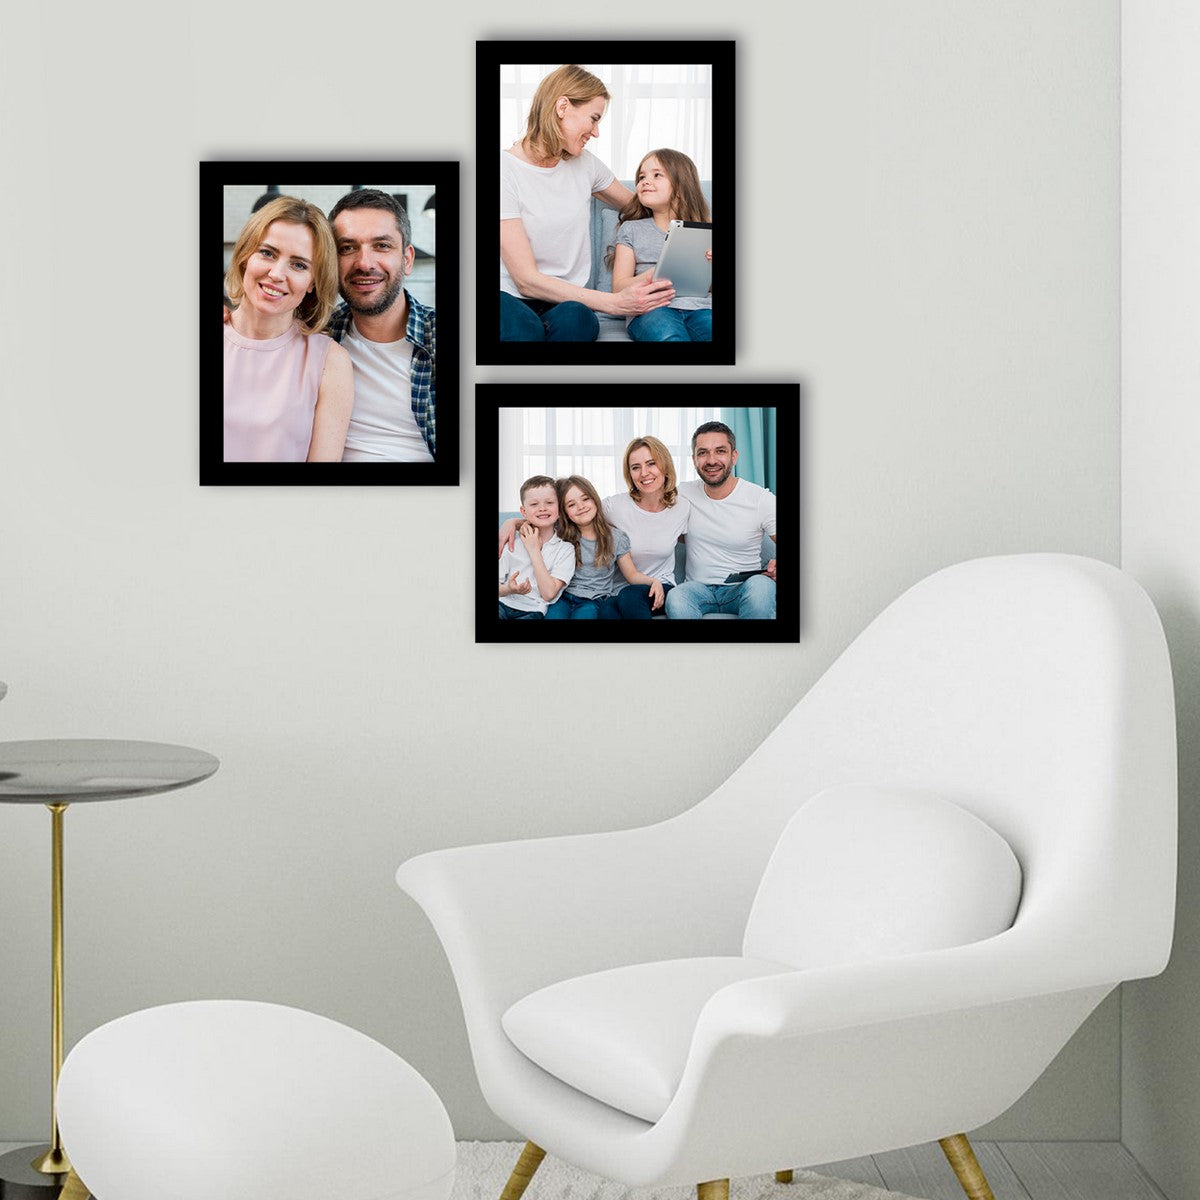 Memory Wall Collage Photo Frame - Set of 3 Photo Frames for 3 Photos of 8"x10" 2